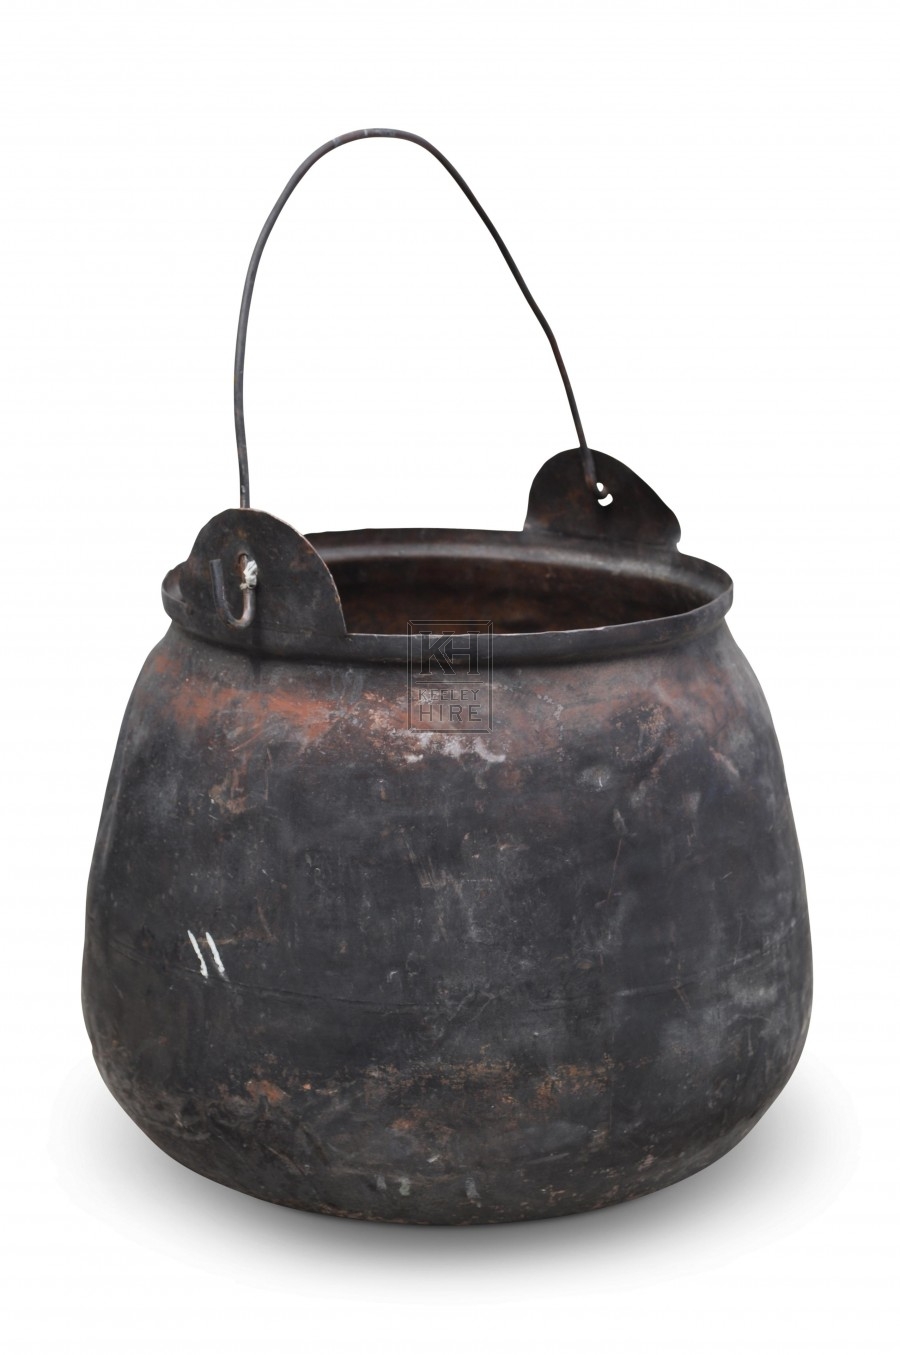 Iron cooking pot with wire handle